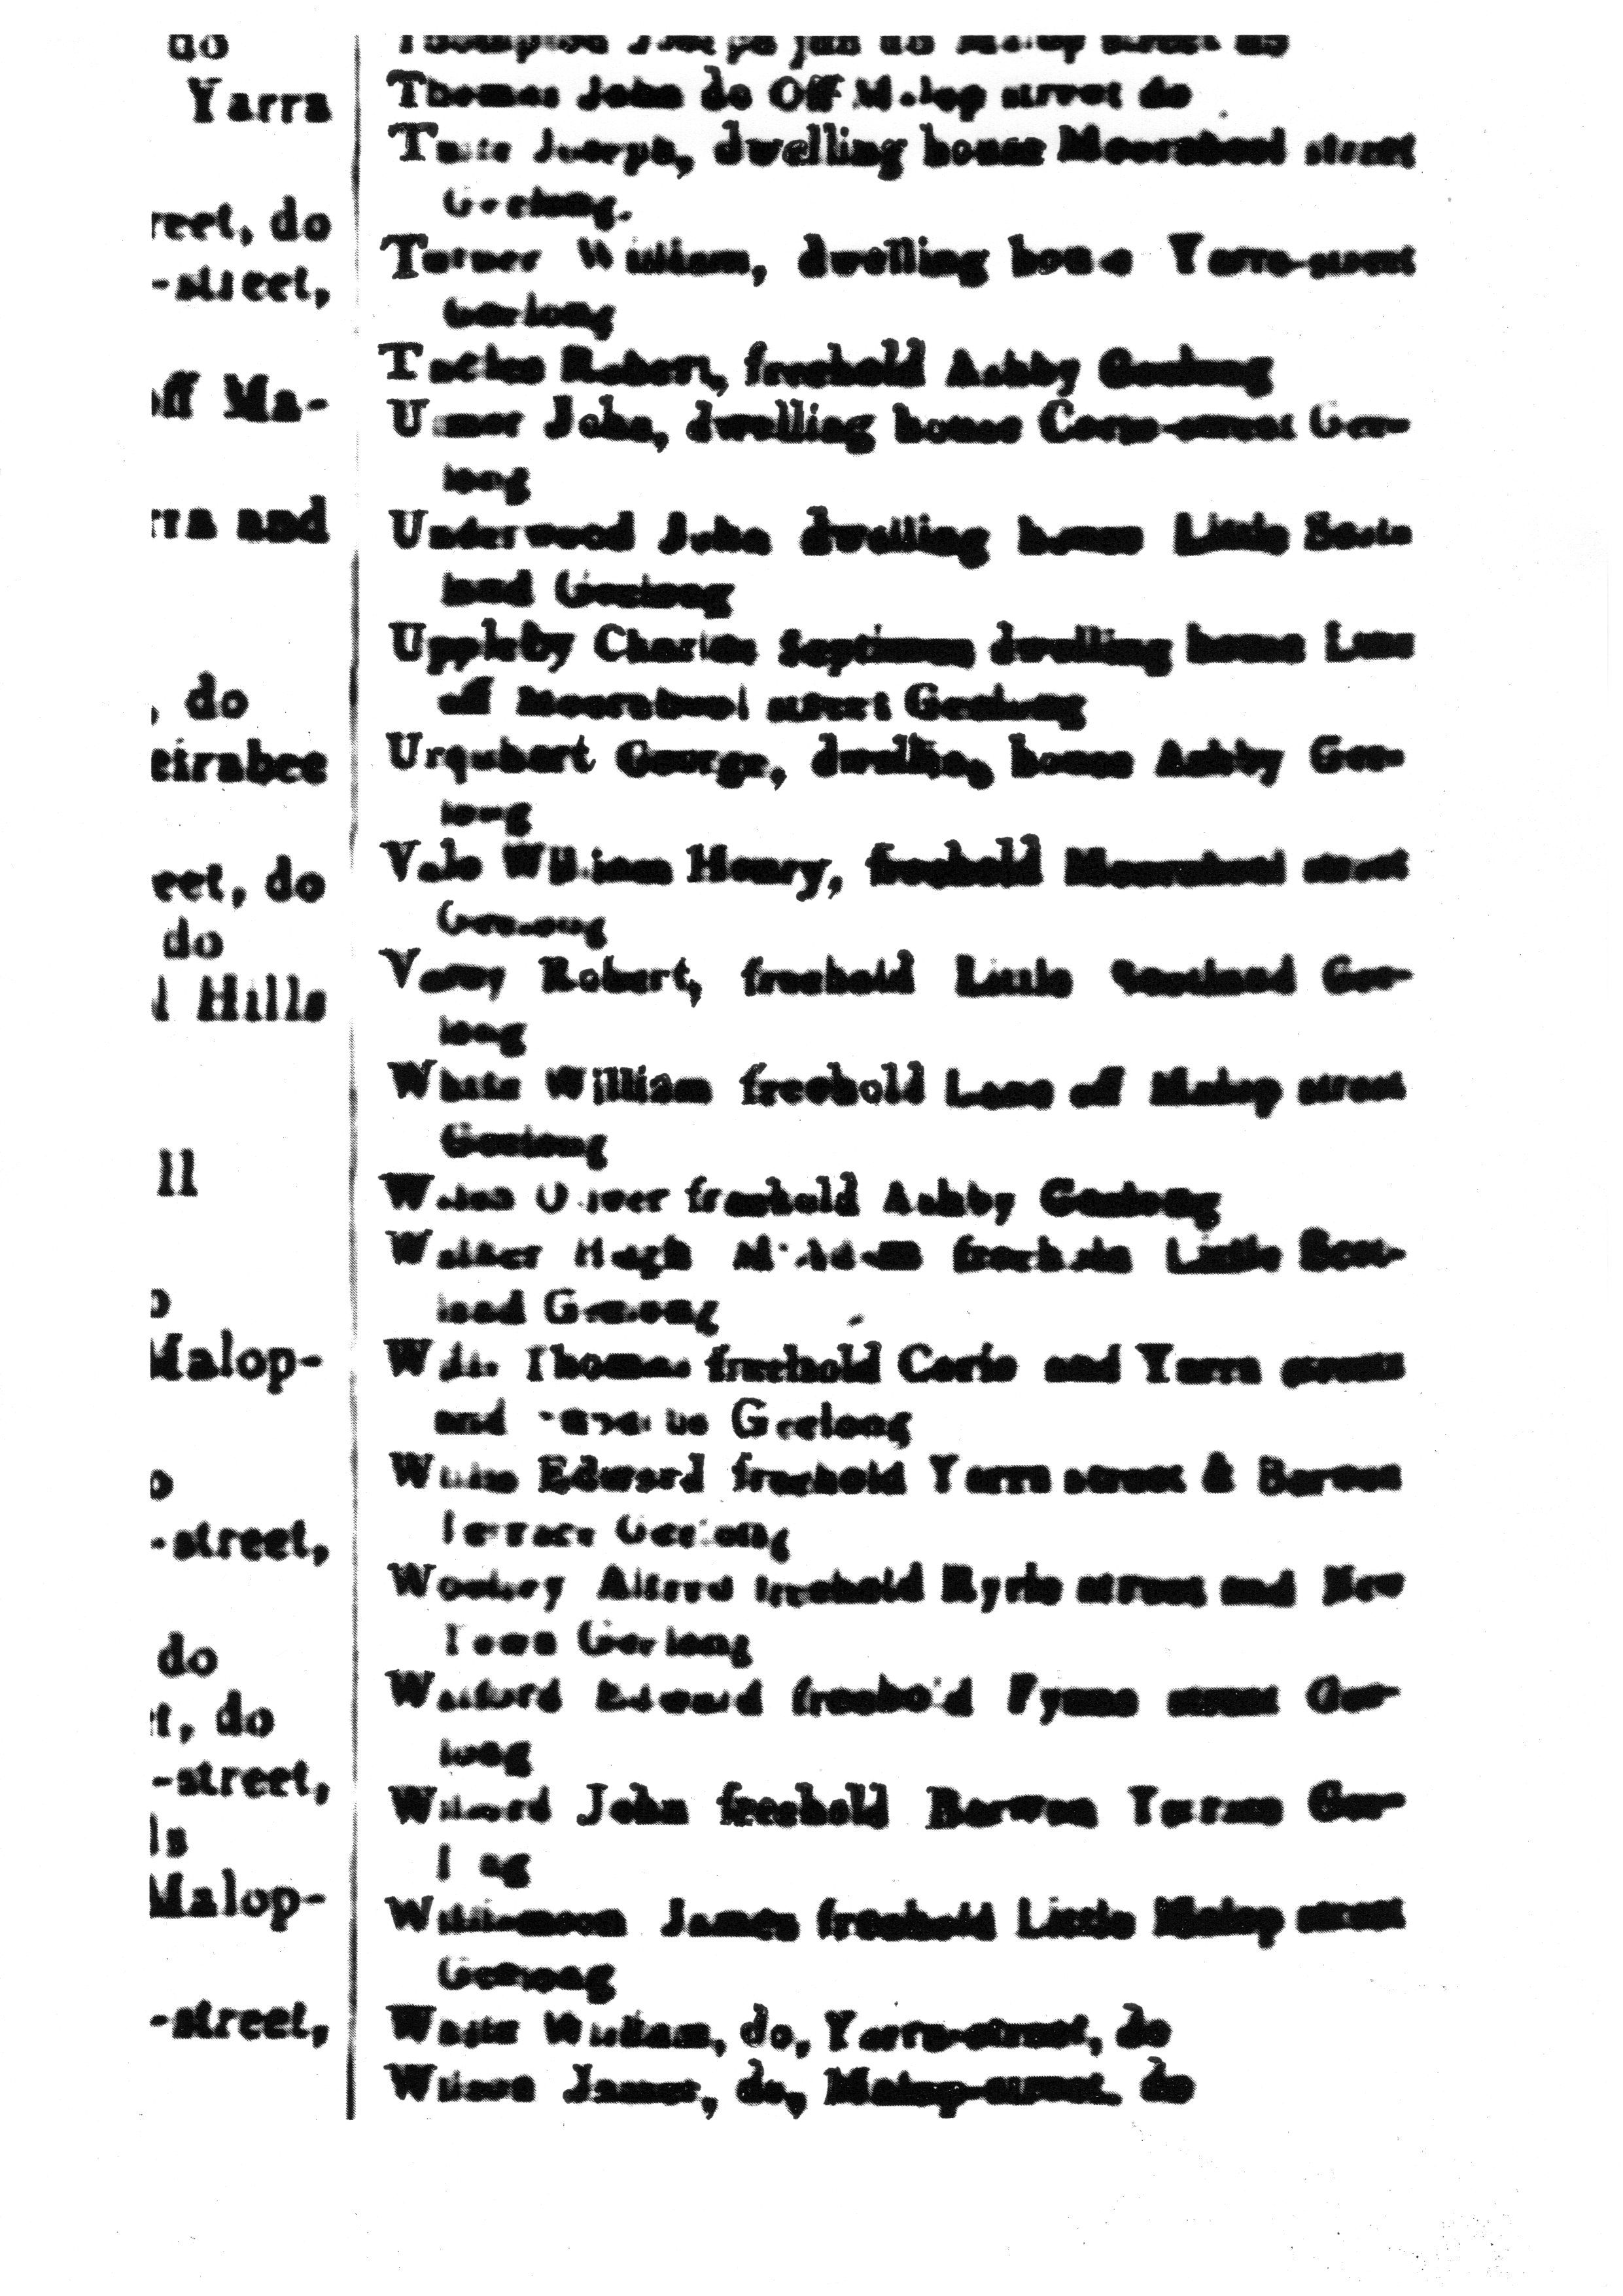 [1850 Electoral Roll of Geelong]